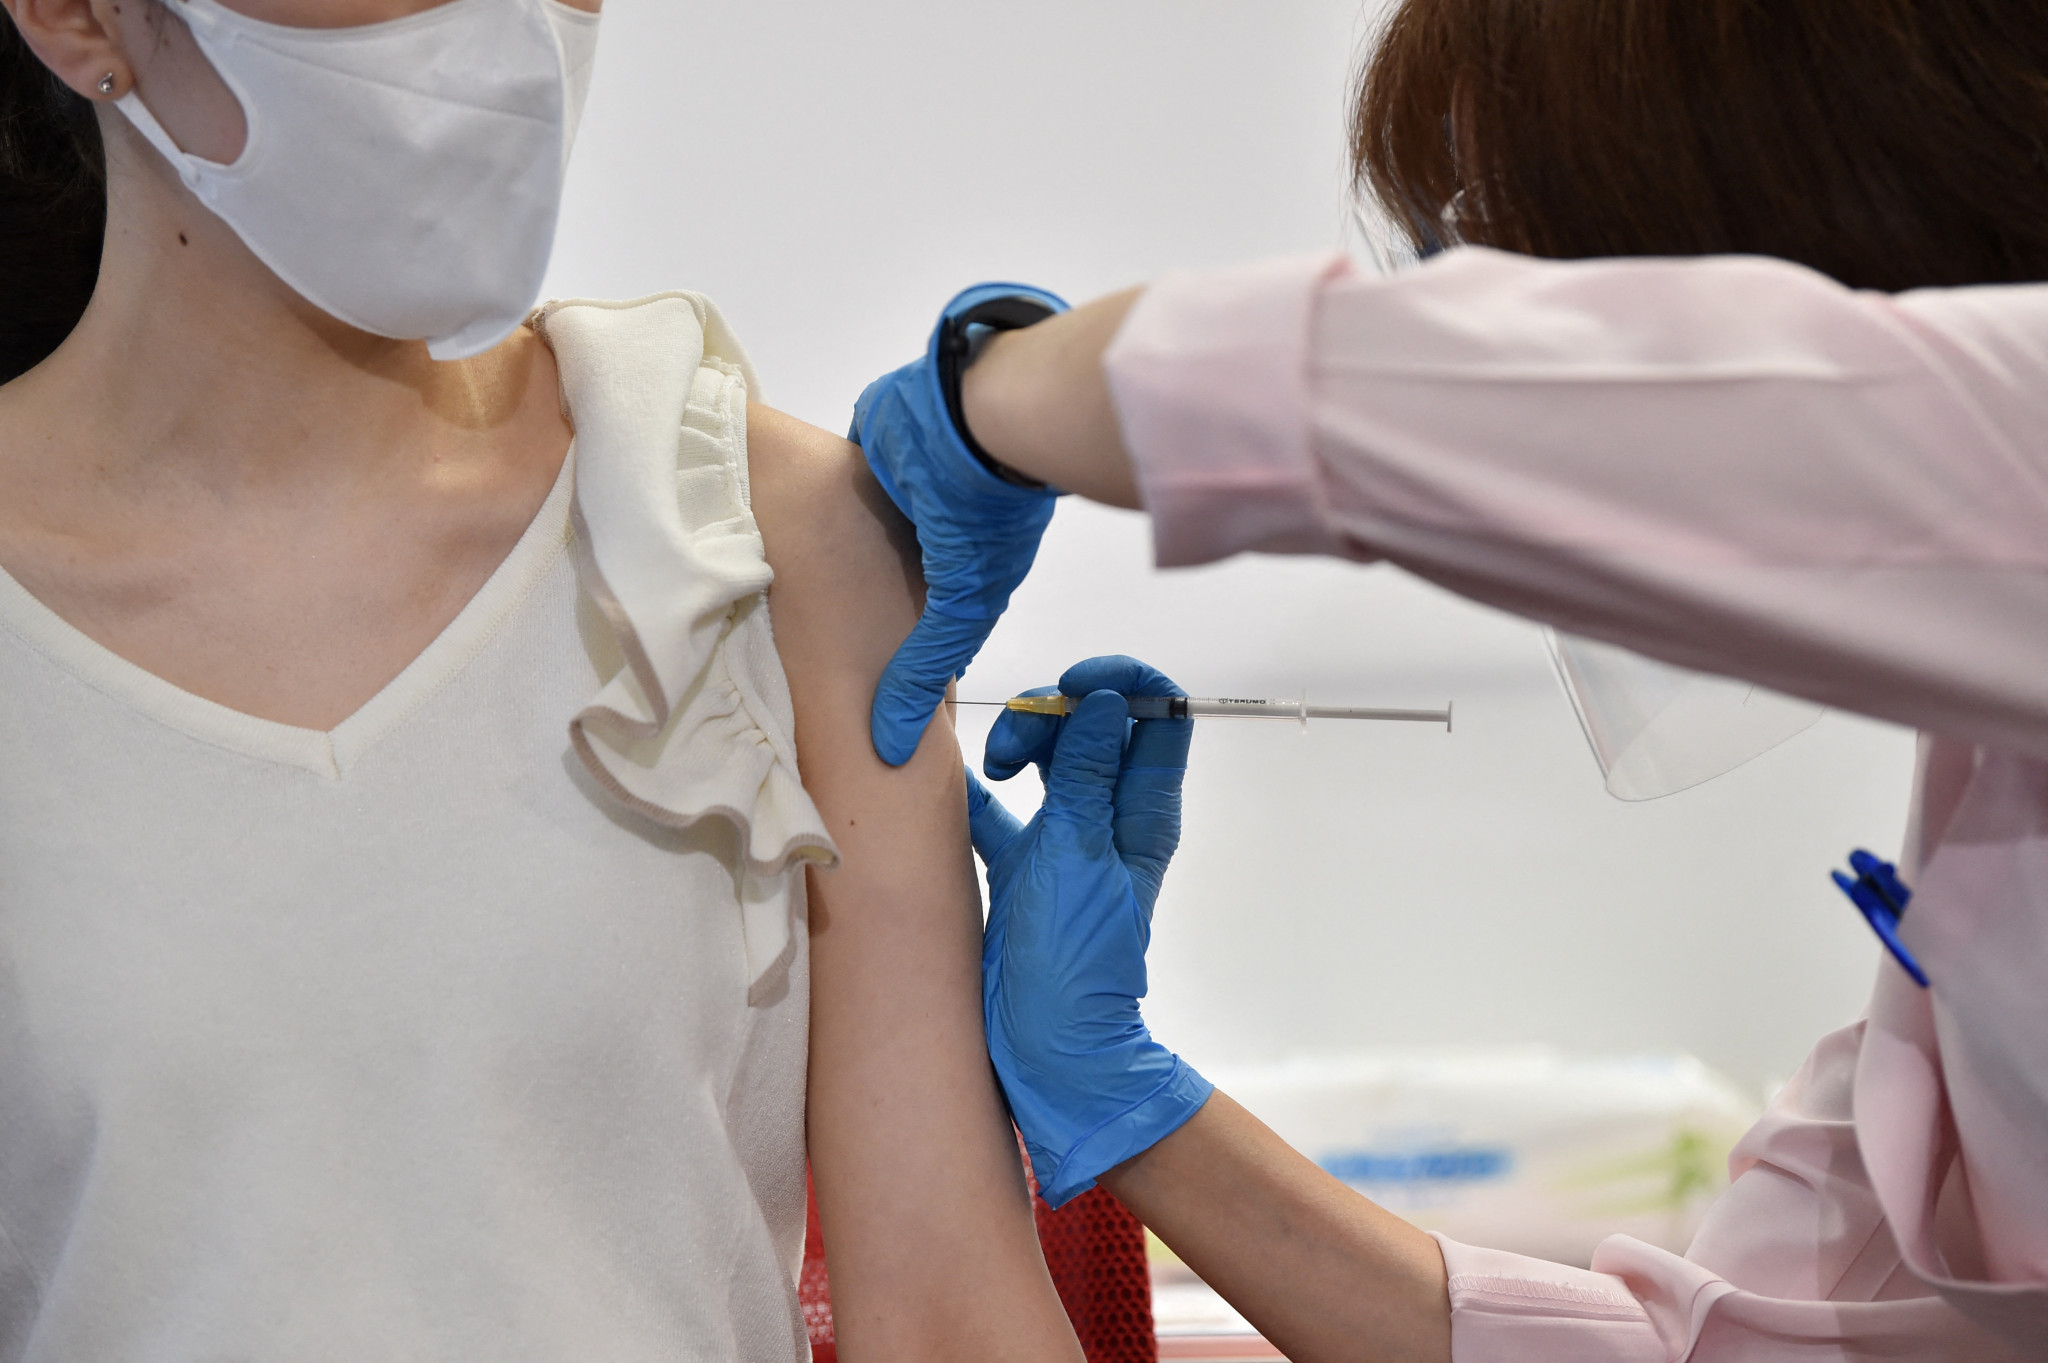 Another 20,000 Olympics workers in Japan are set to receive the COVID-19 vaccine ©Getty Images